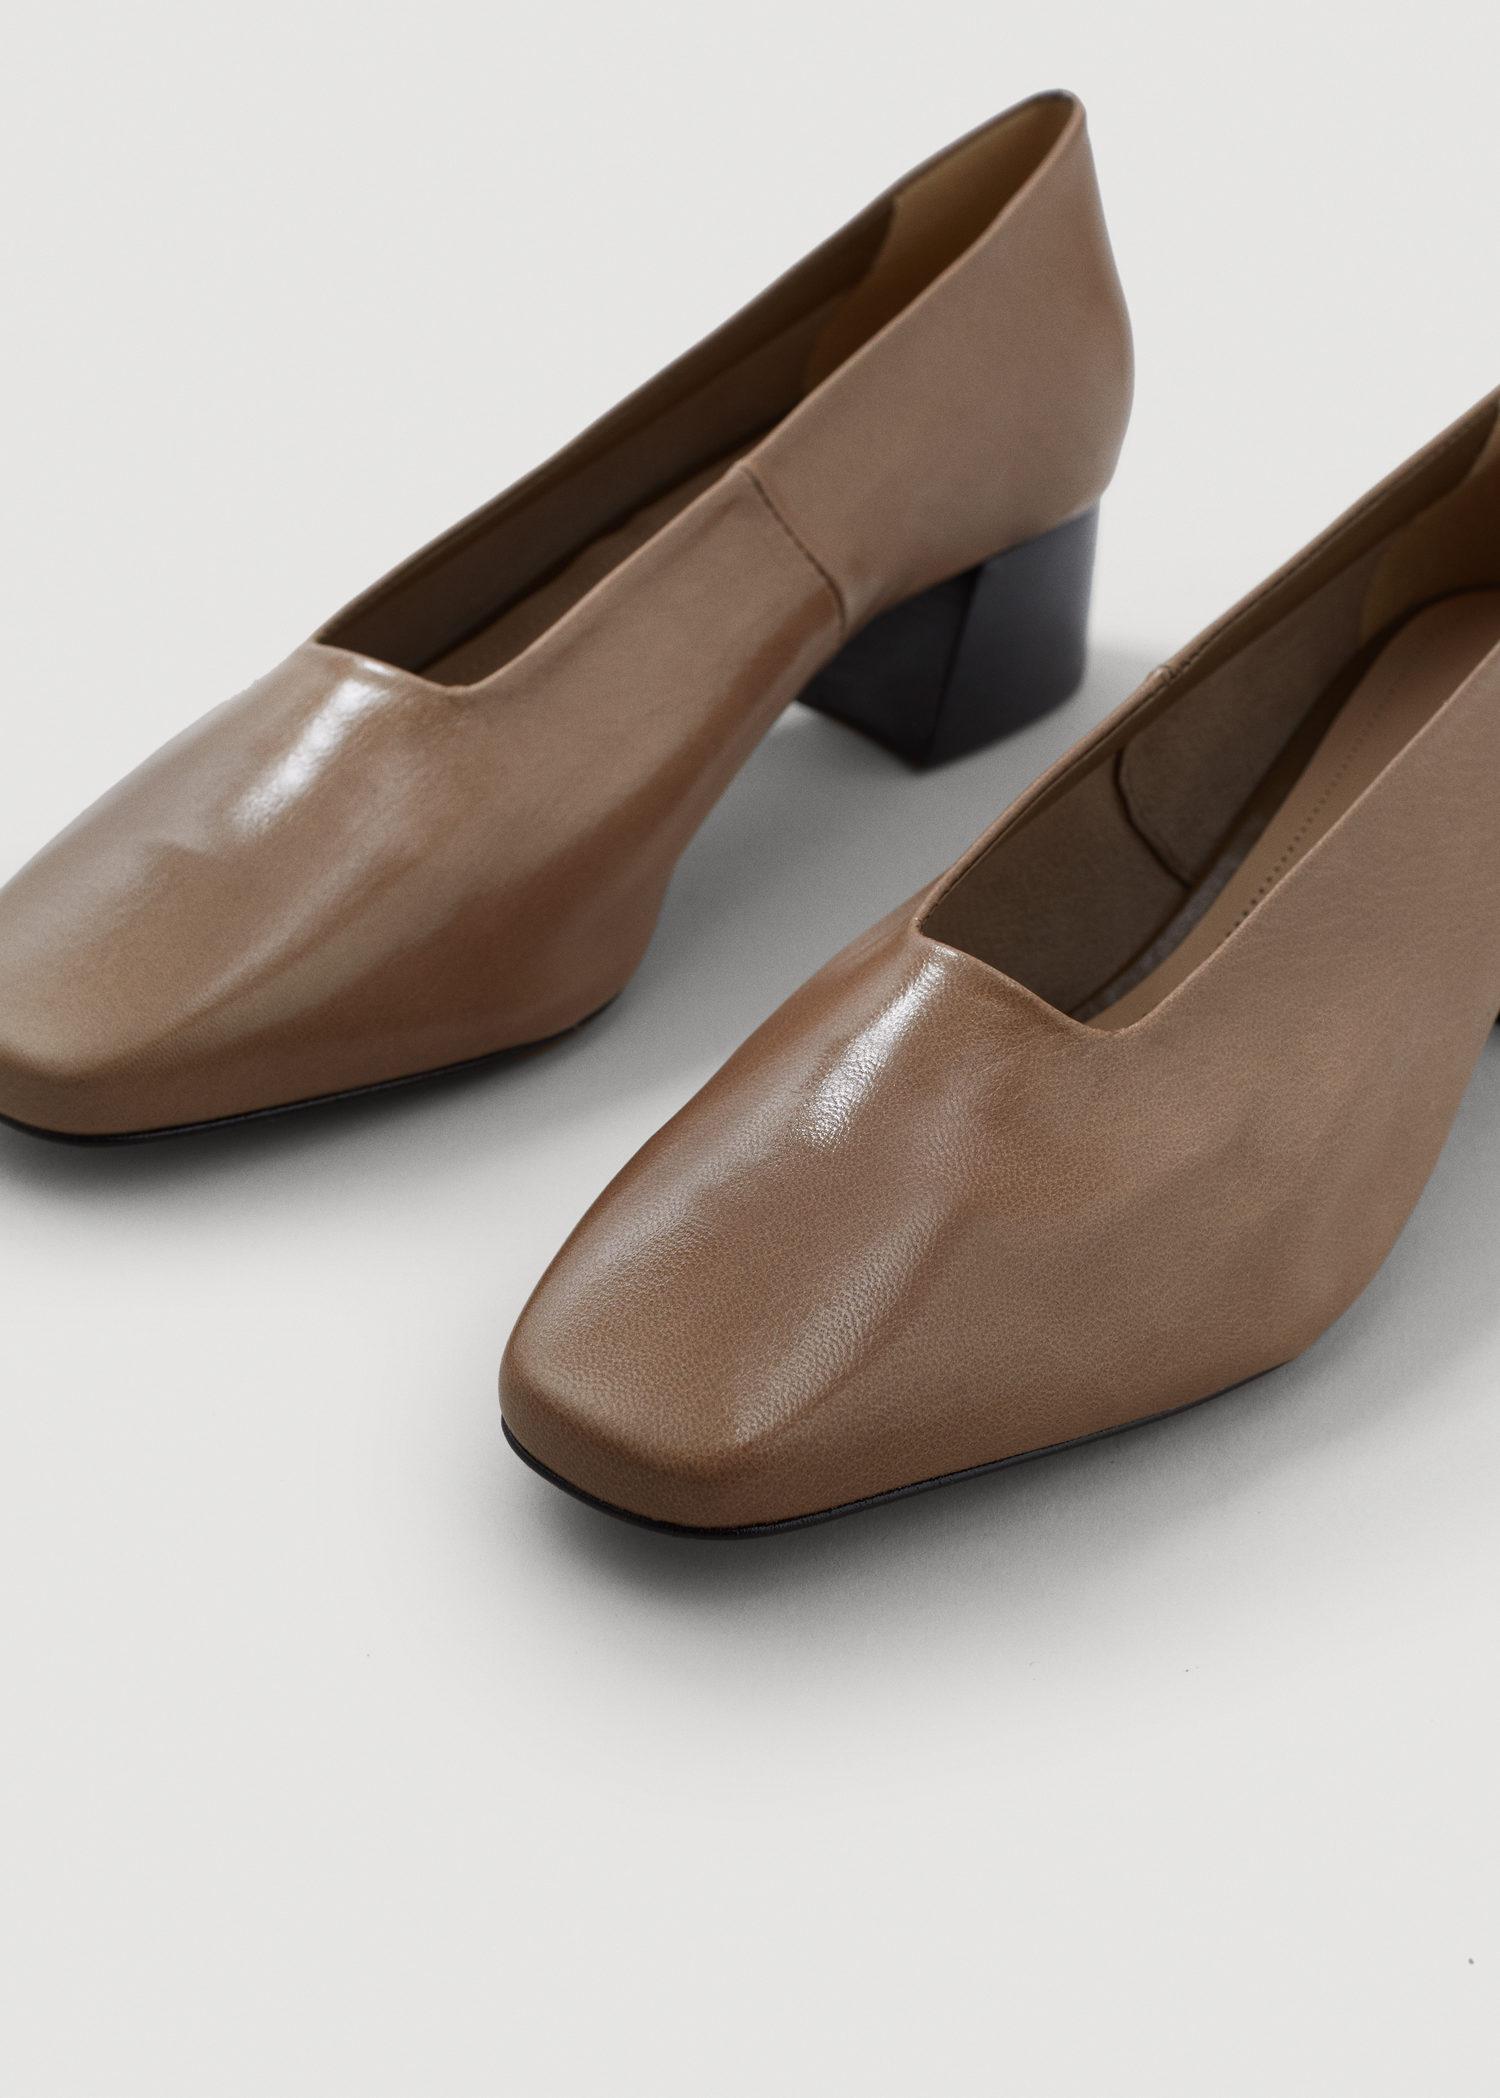 Mango Heel Leather Shoes in Brown - Lyst